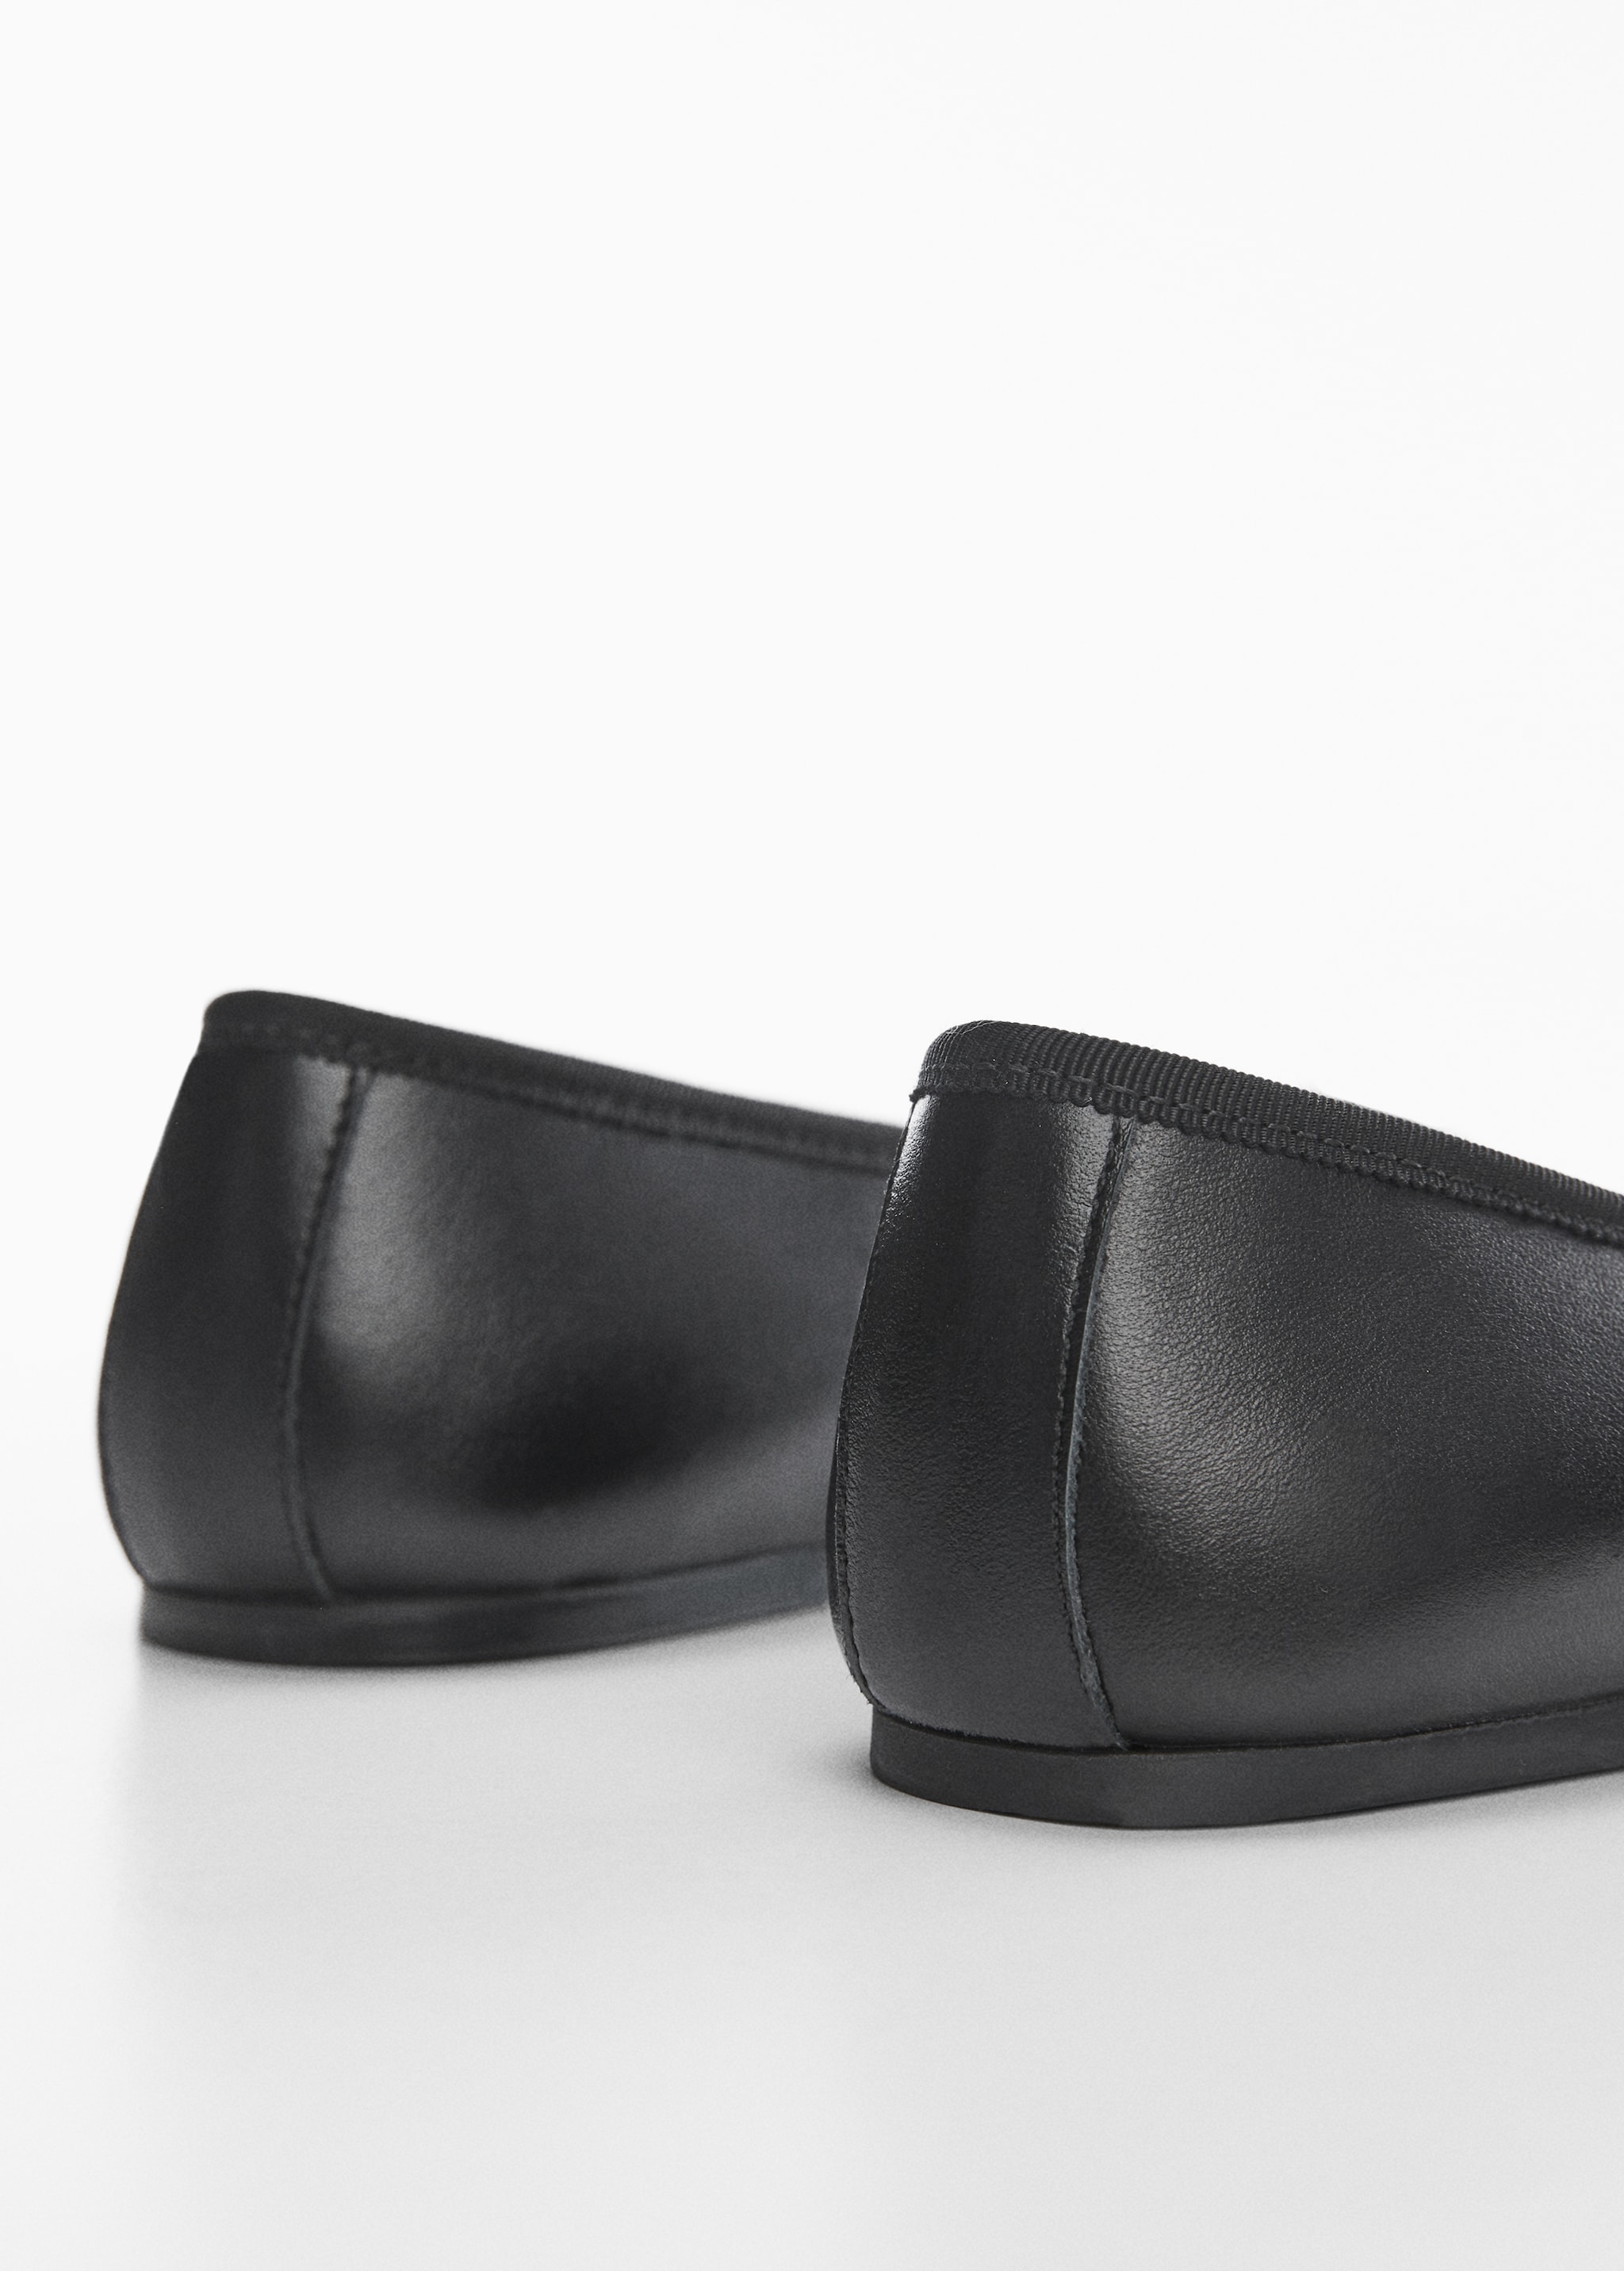 Bow leather ballerina - Details of the article 1